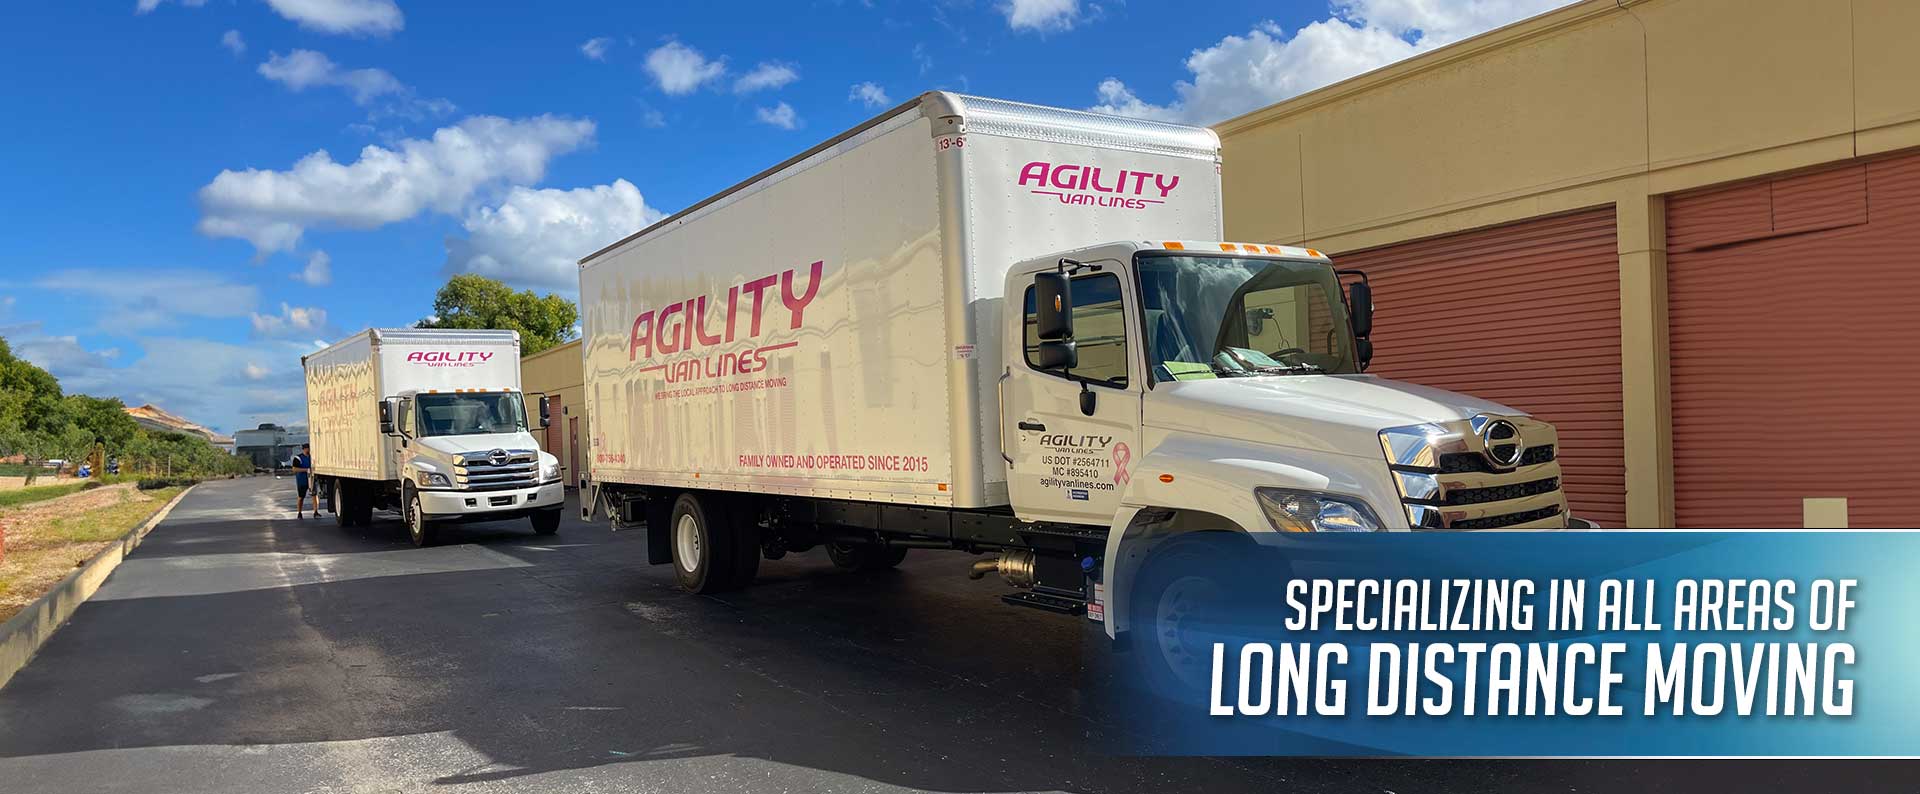 Agility Van Lines - Long Distance Movers